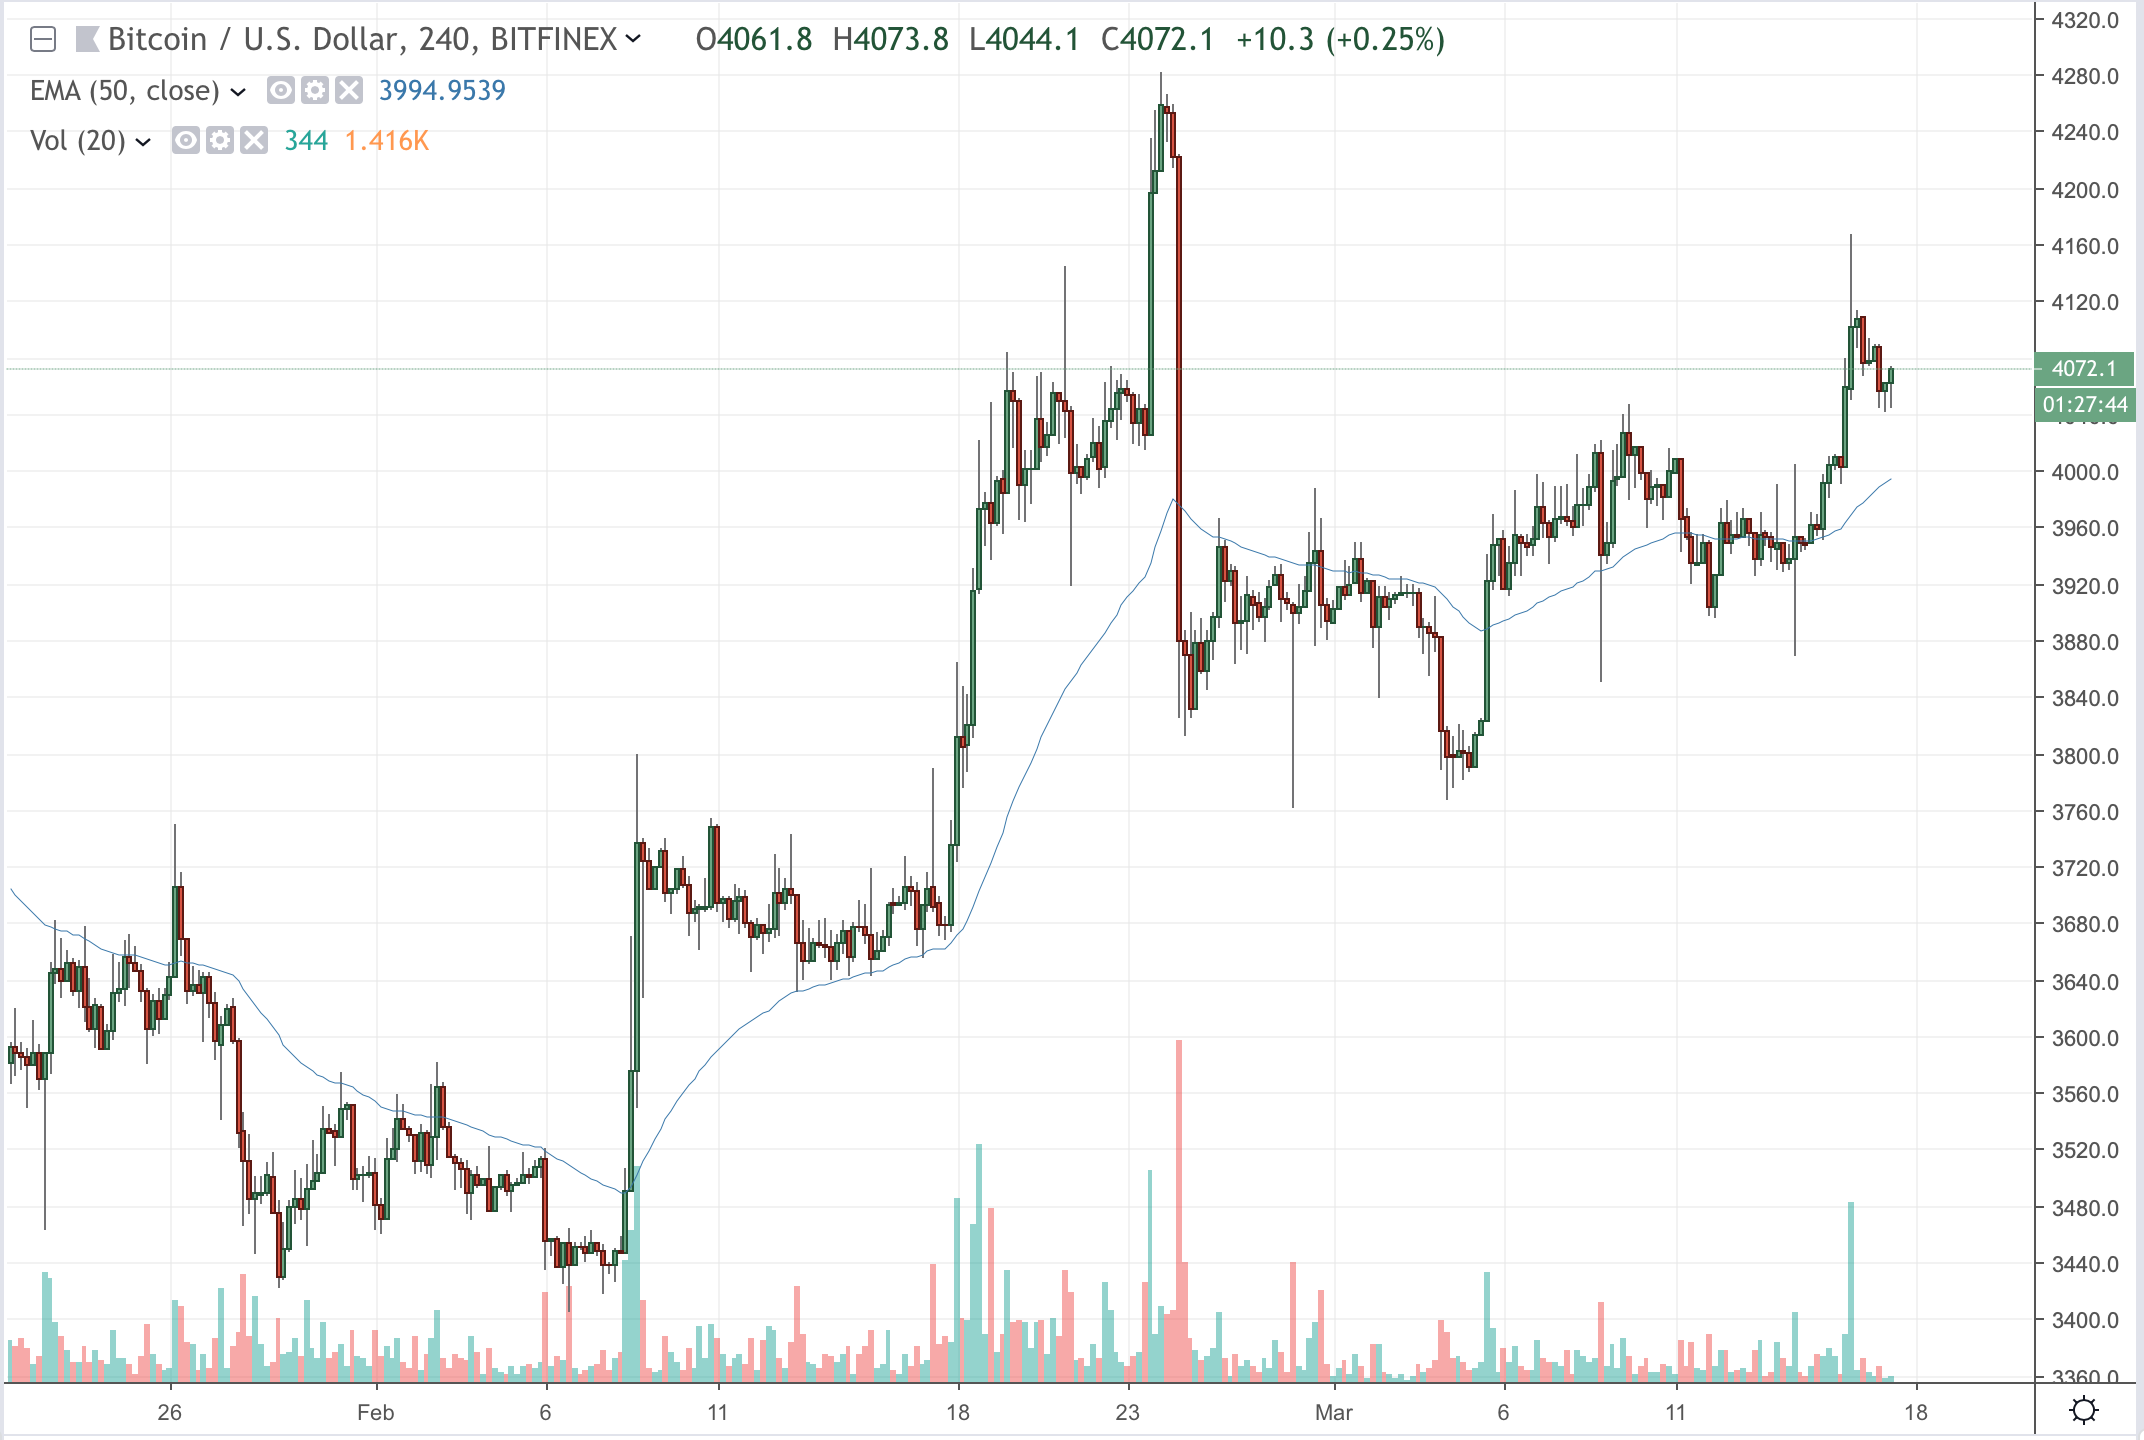 Bitcoin Rallying Above $4,000 Could be Due to Bitmex ...